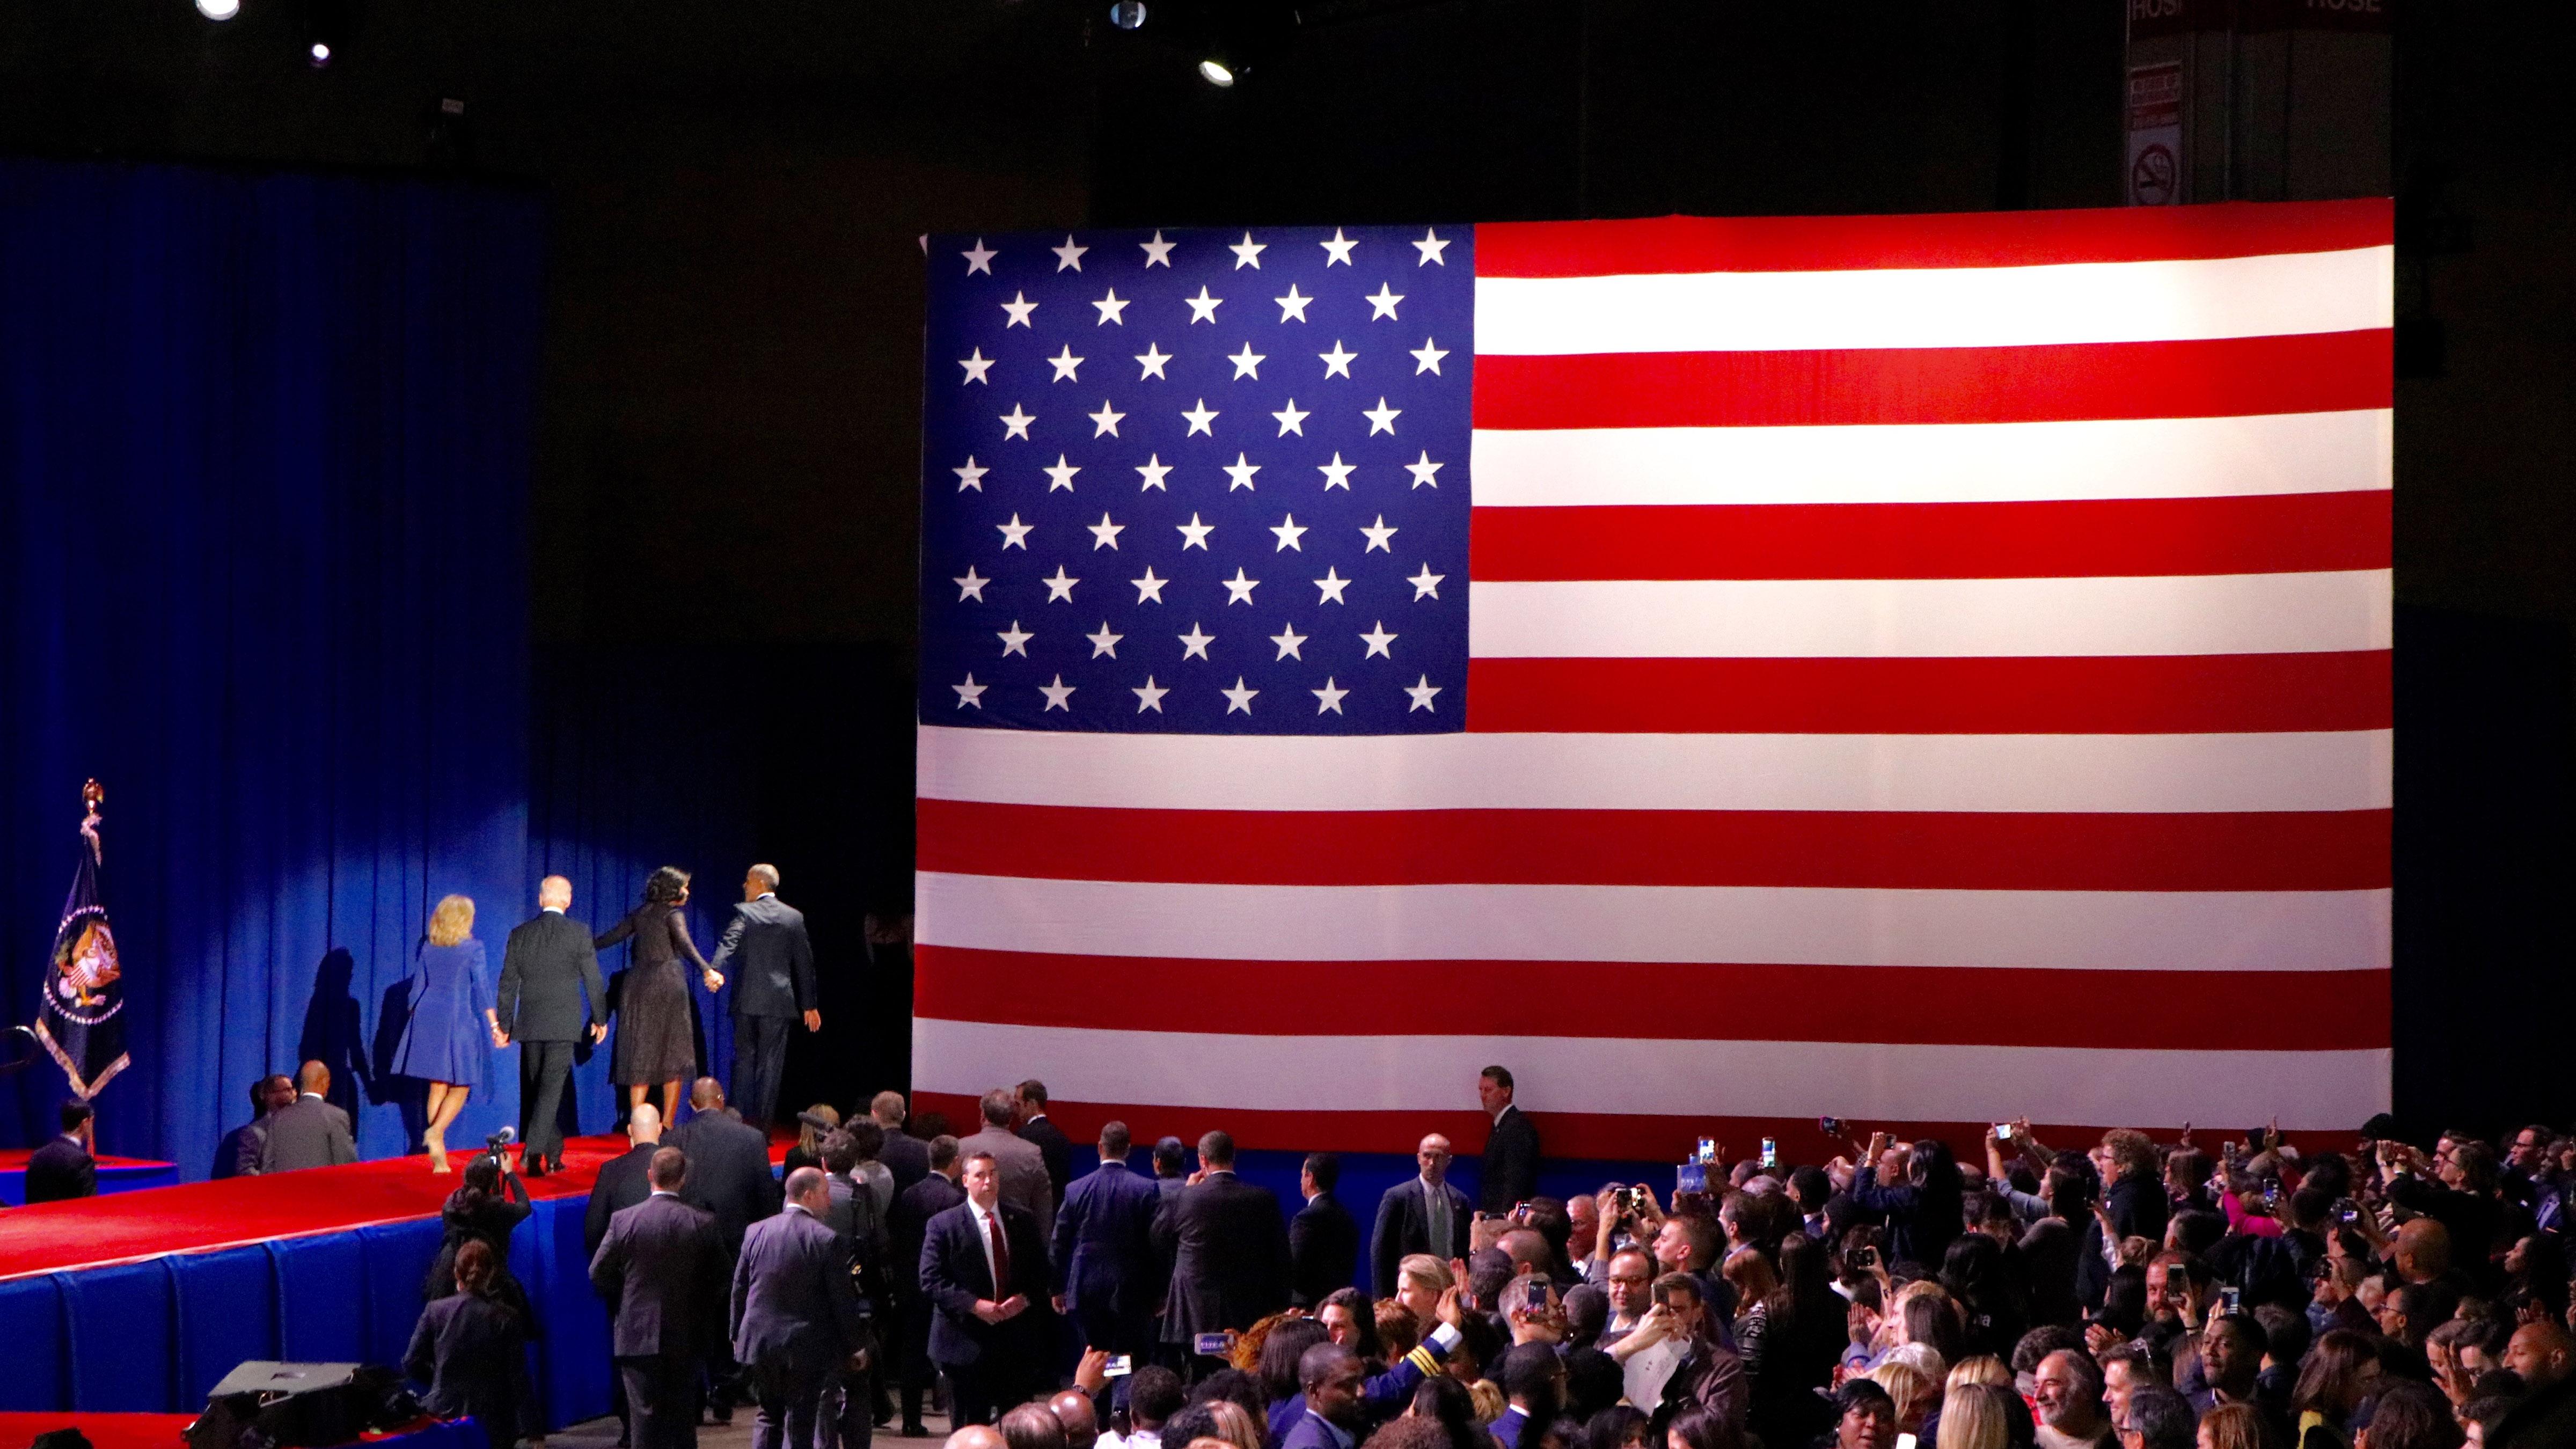 The president, first lady, vice president and second lady leave the stage. (Evan Garcia / Chicago Tonight)